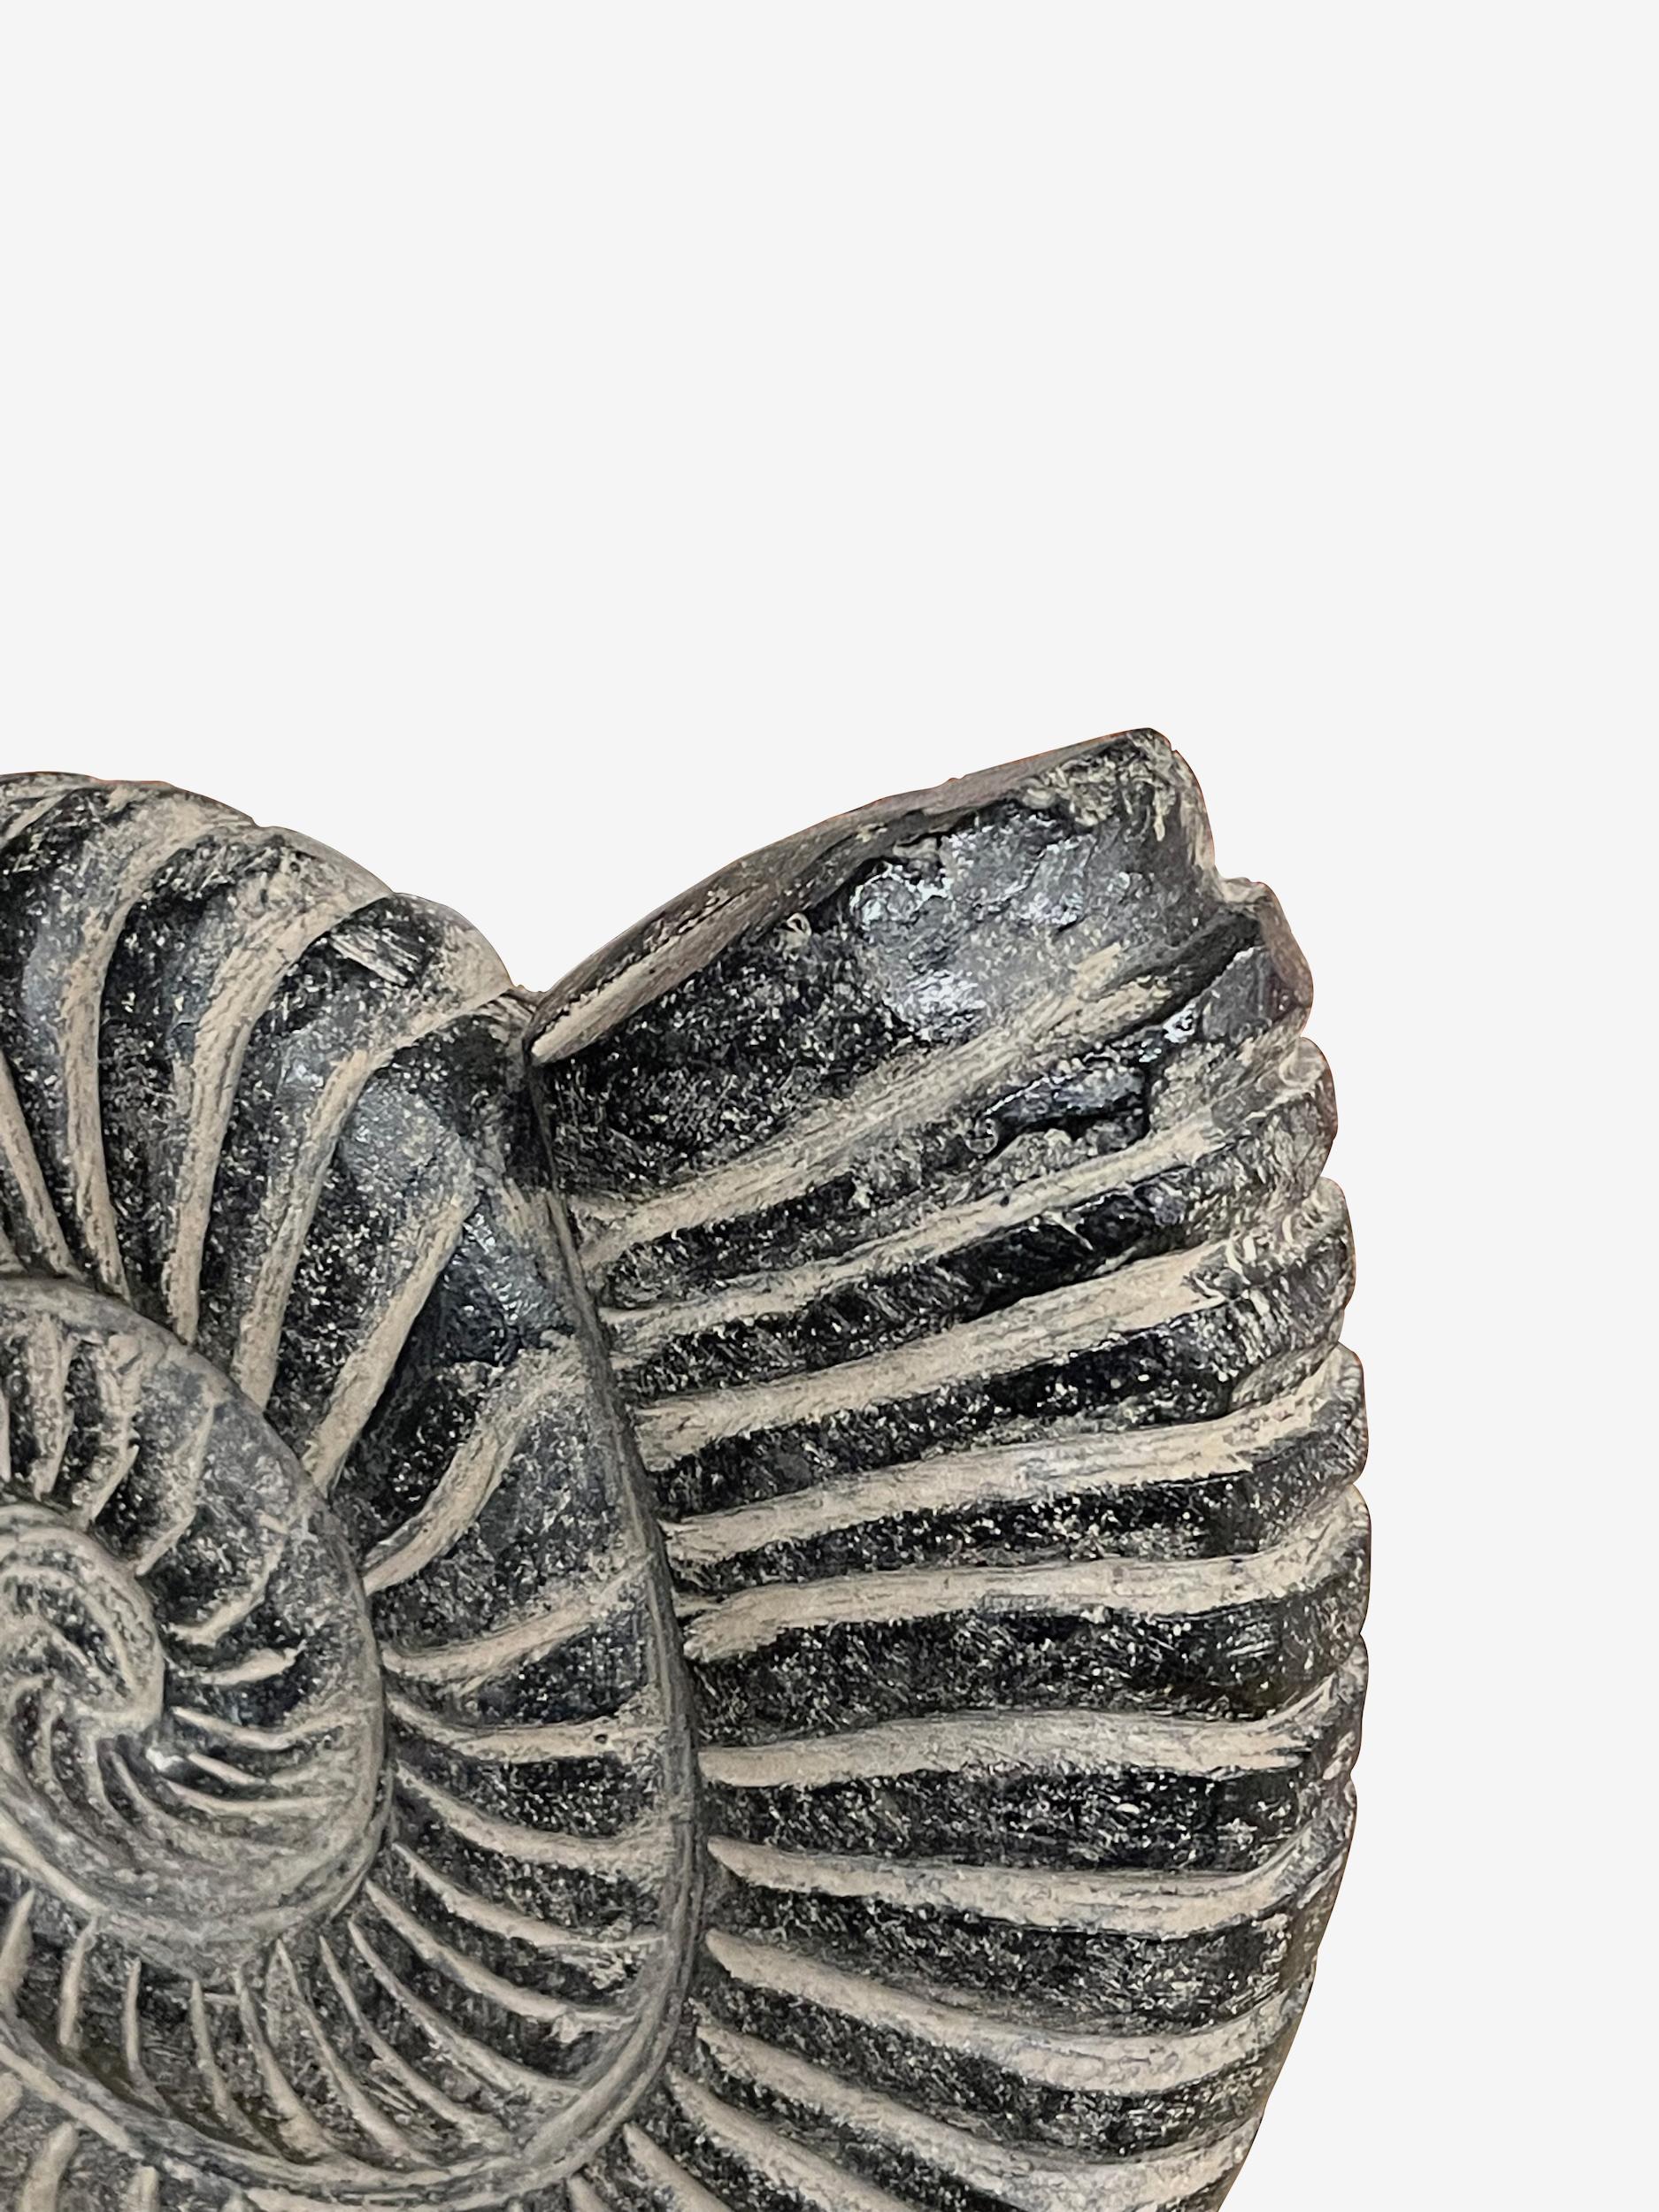 Contemporary Indonesian black ammonite on iron stand.
Stand measures 8